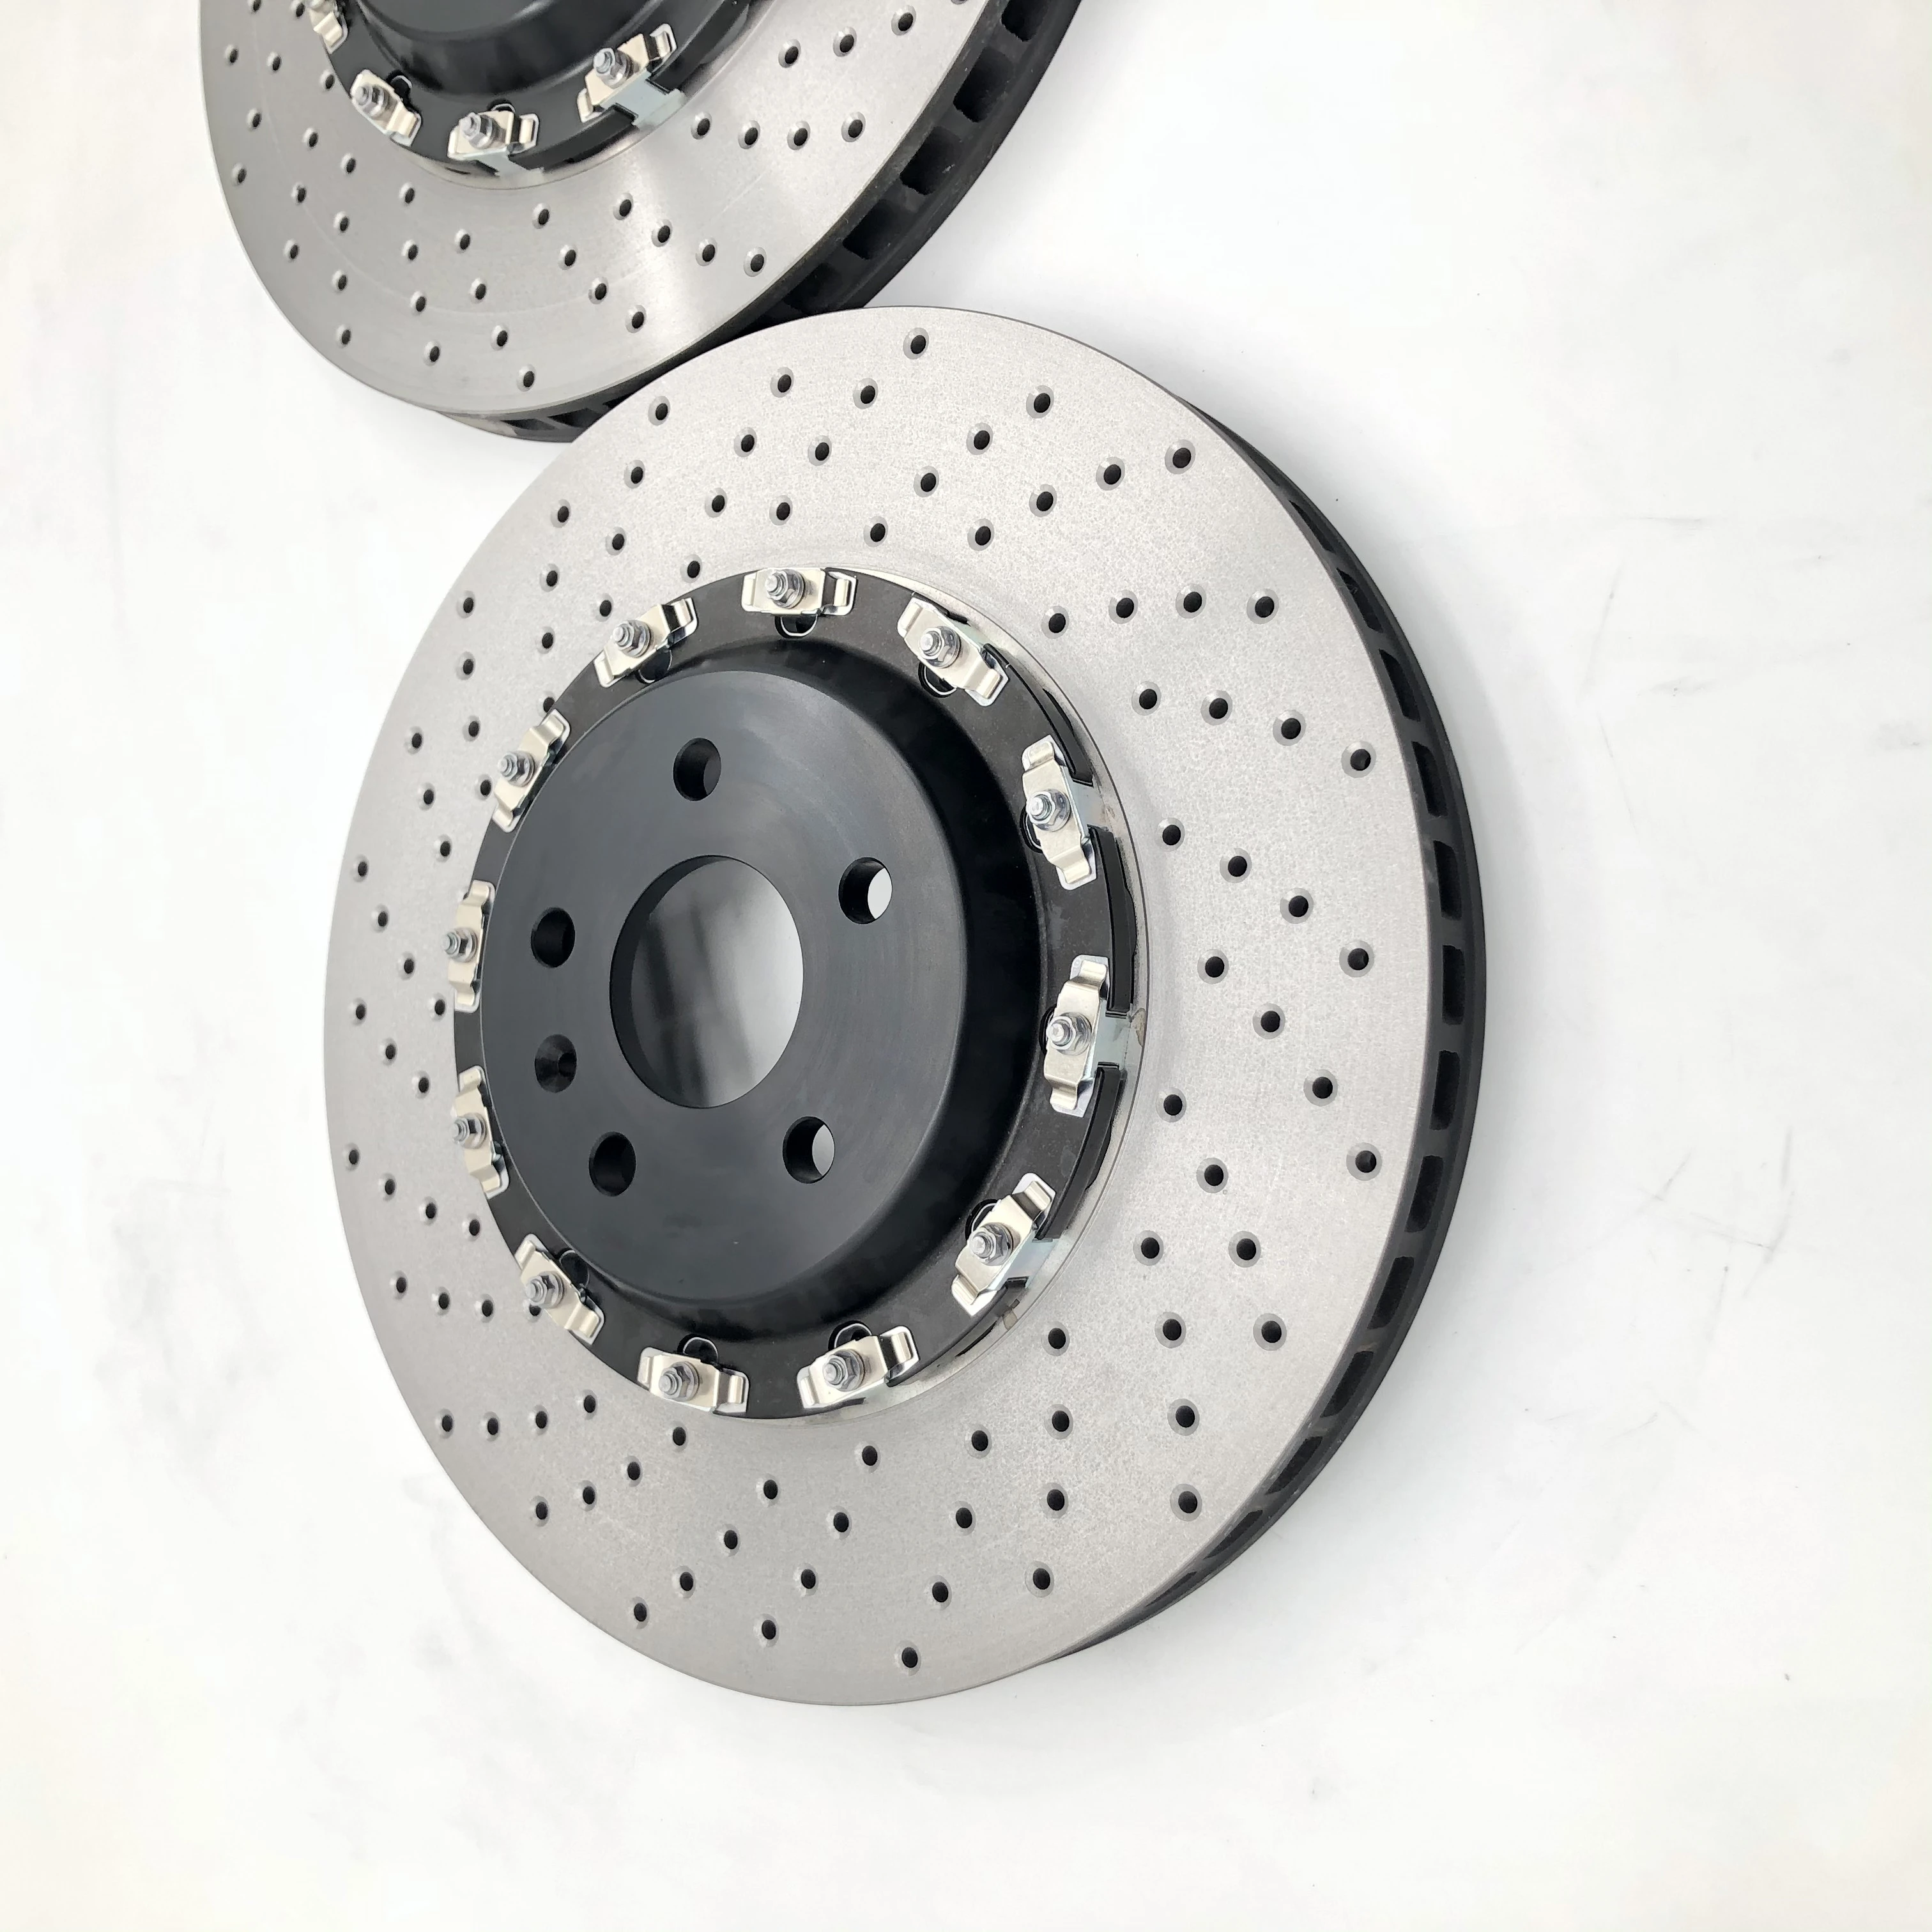 High performance 380*34 mm sport brake disc rotor disk modified for racing car